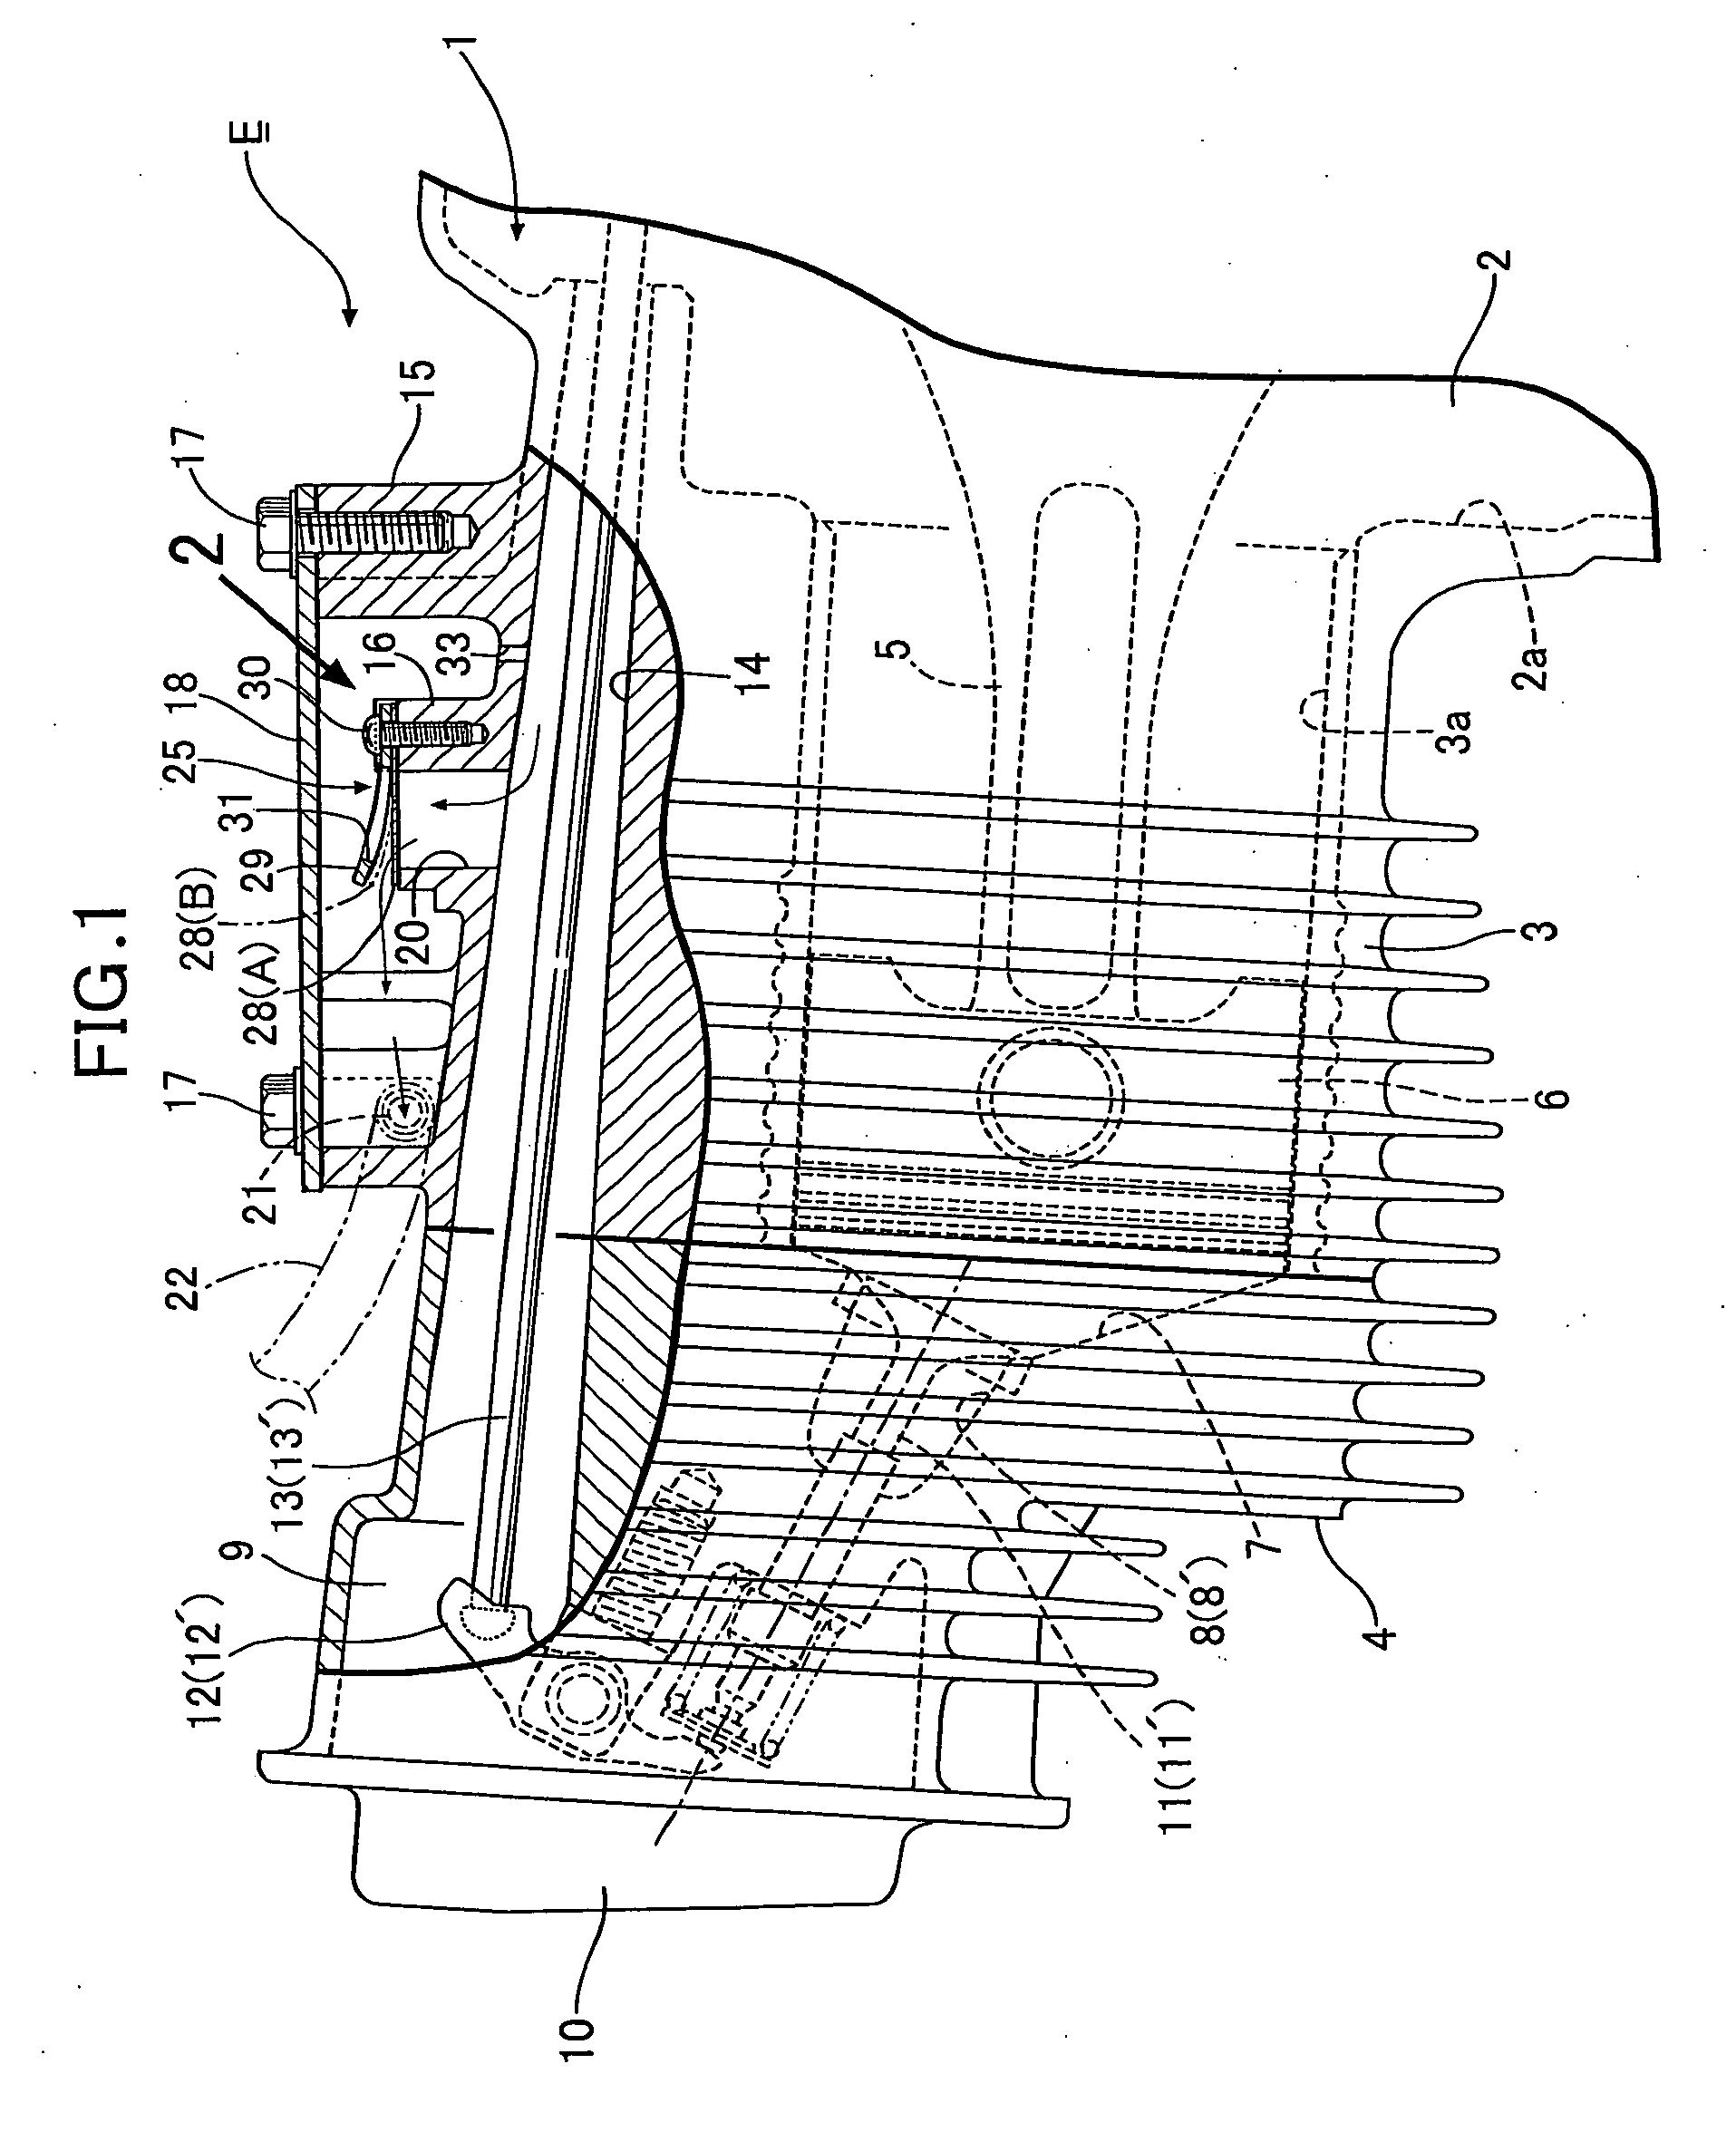 Breather device for engine